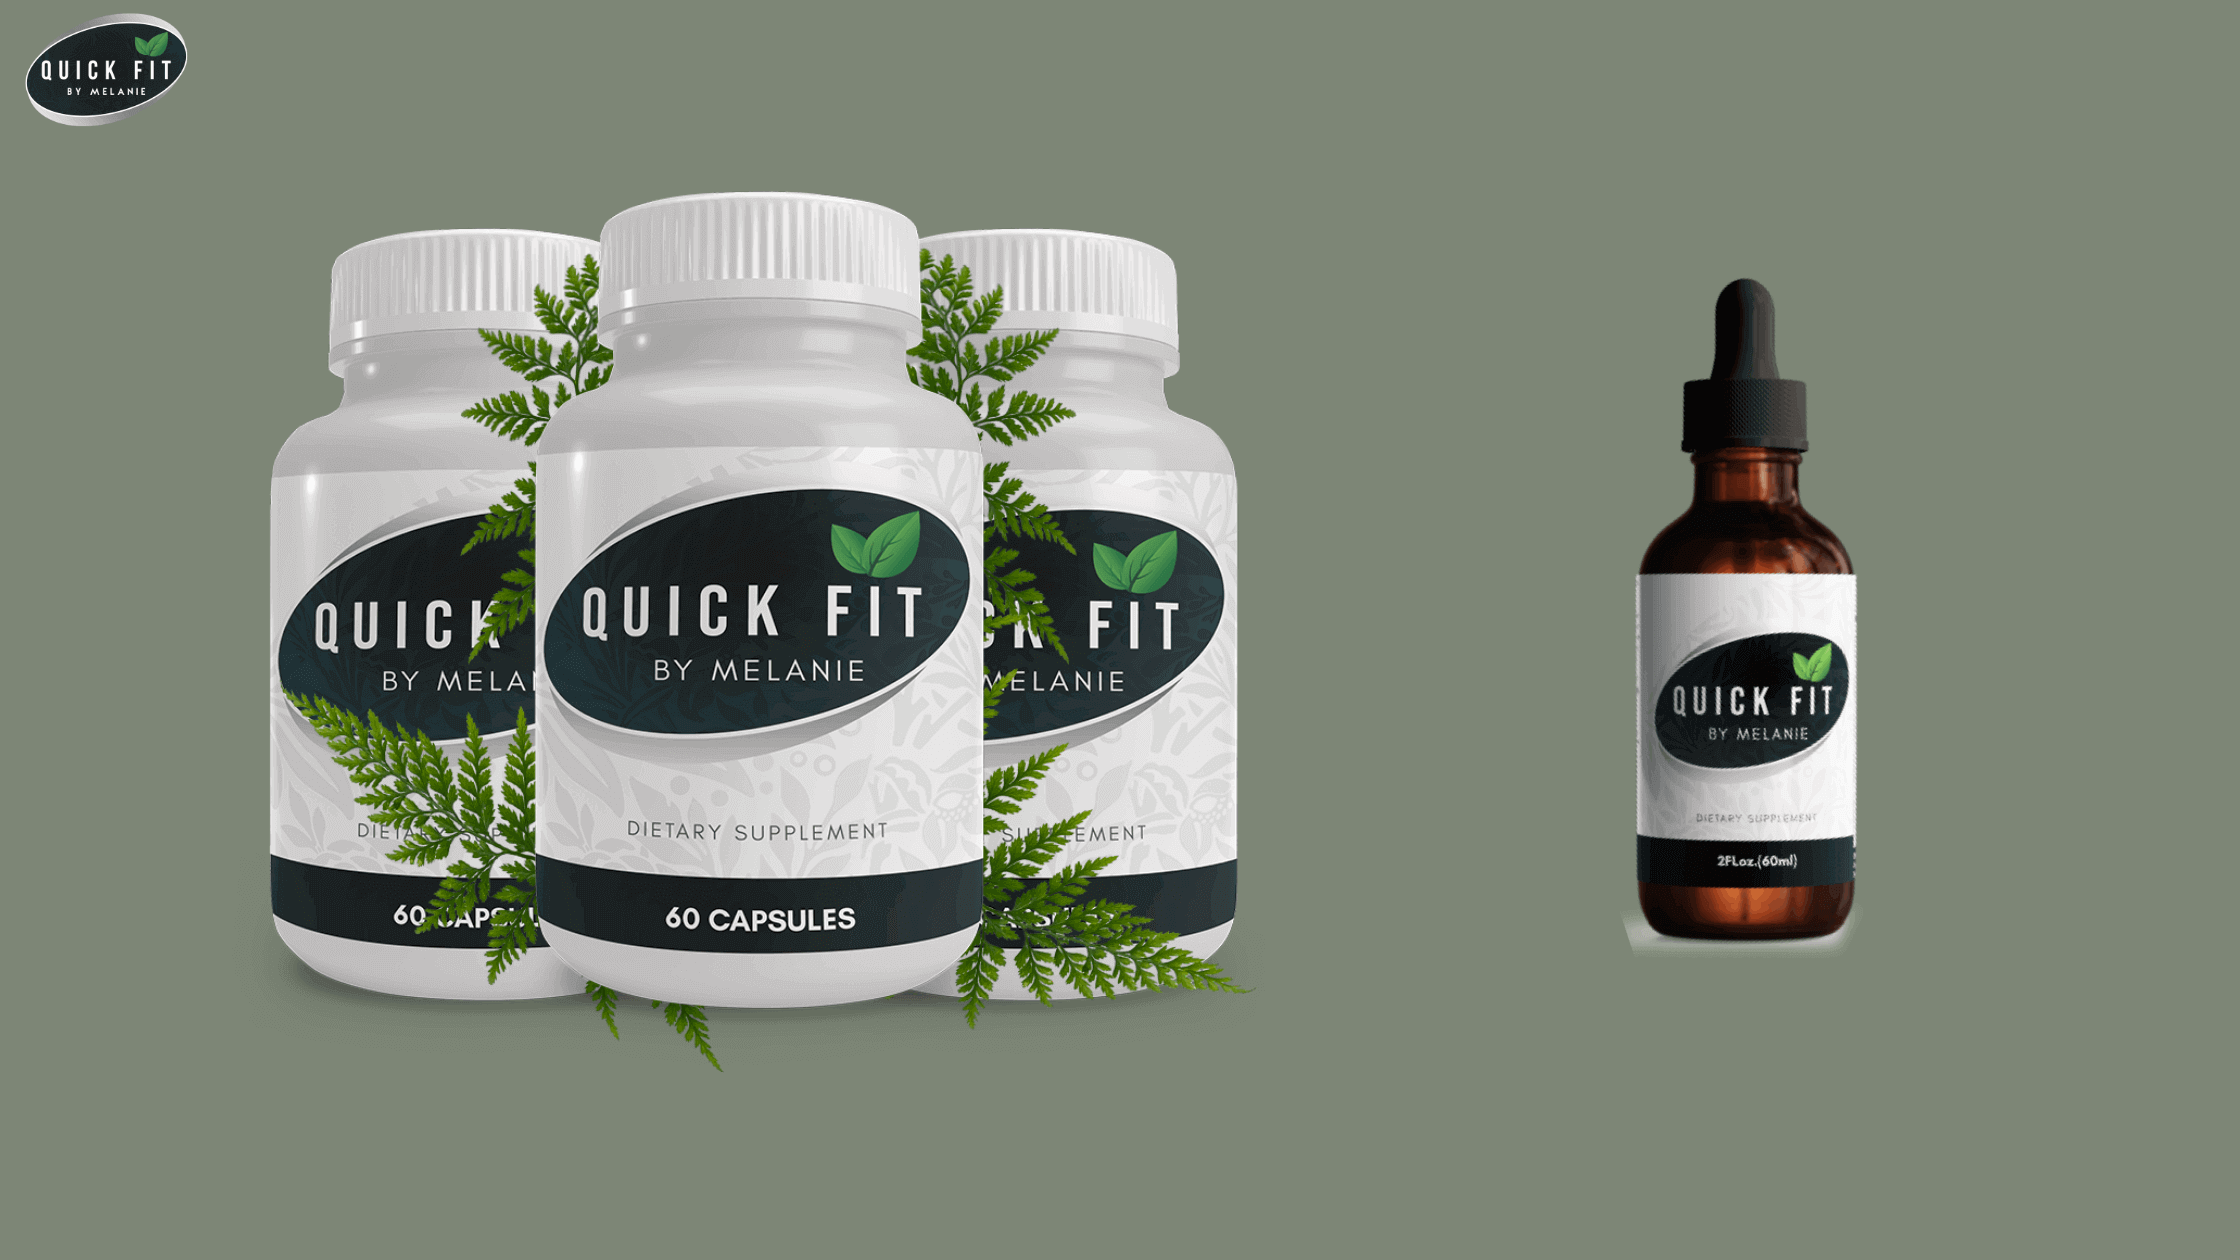 Quick Fit By Melanie drops supplement